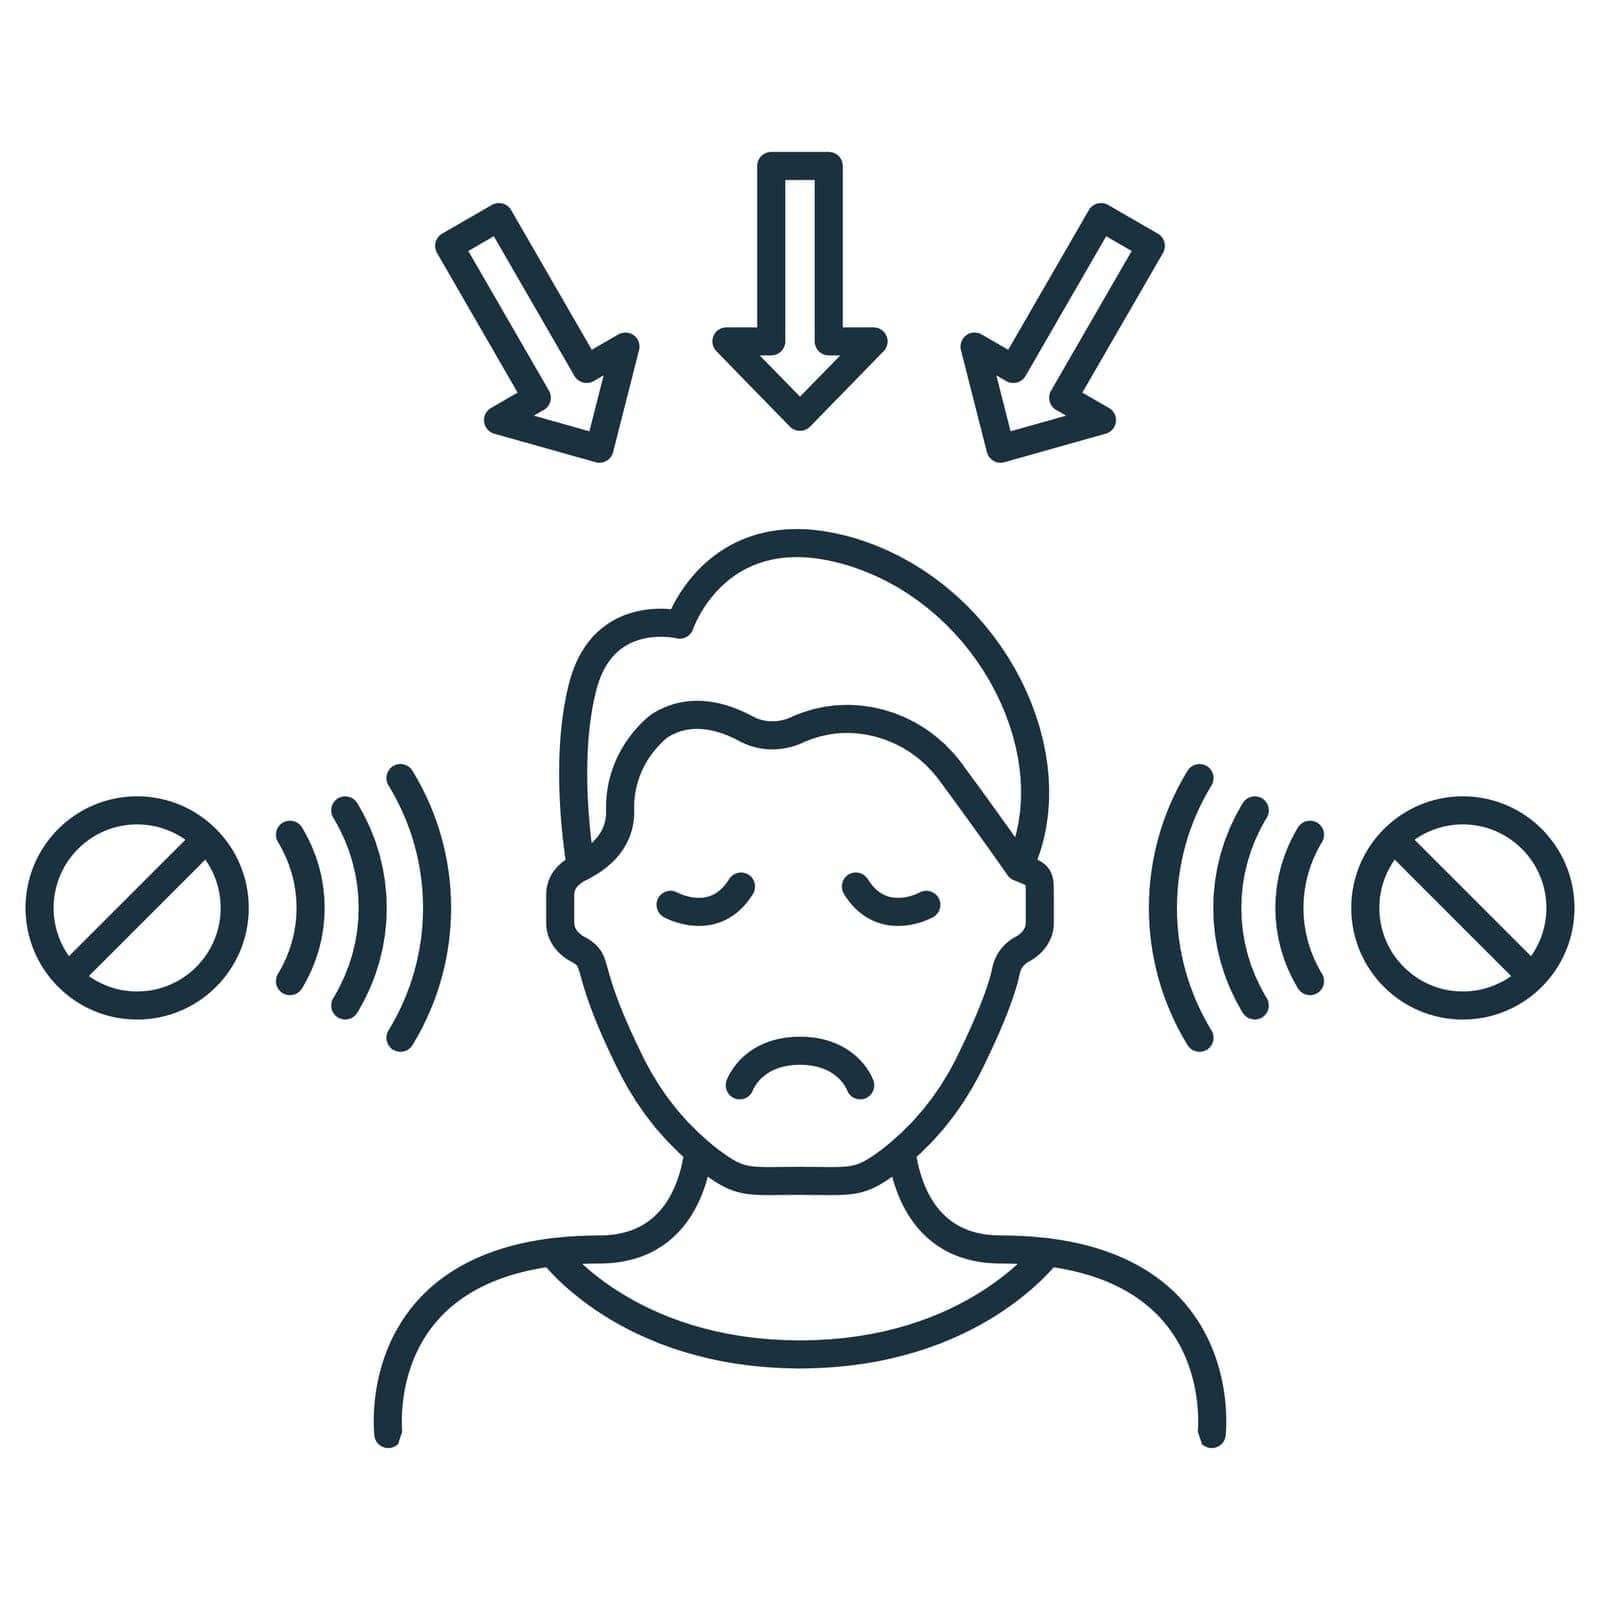 Social Bad Influence on Man Line Icon. Negative Impact from Media and Internet Linear Pictogram. Depressed, Upset Man under Bad Influence Outline Icon. Editable Stroke. Isolated Vector Illustration by Toxa2x2